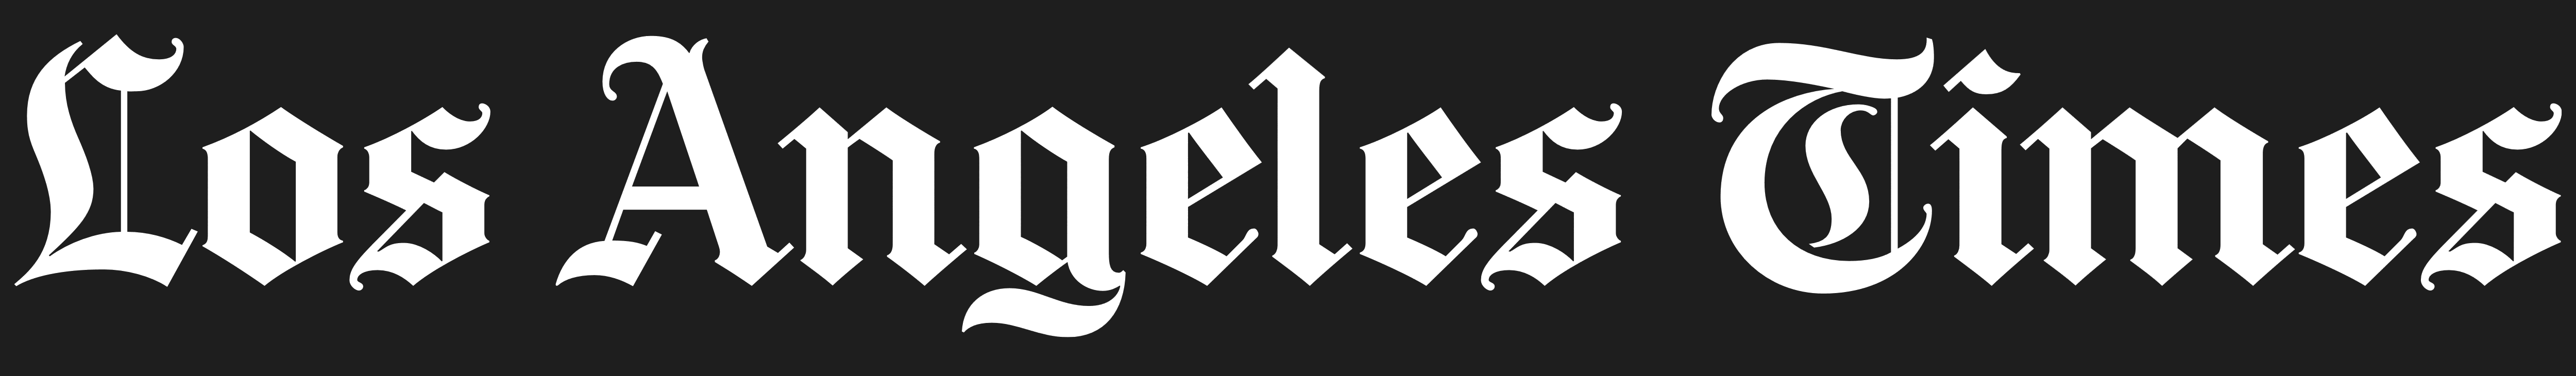 Los Angeles Times – Logos Download